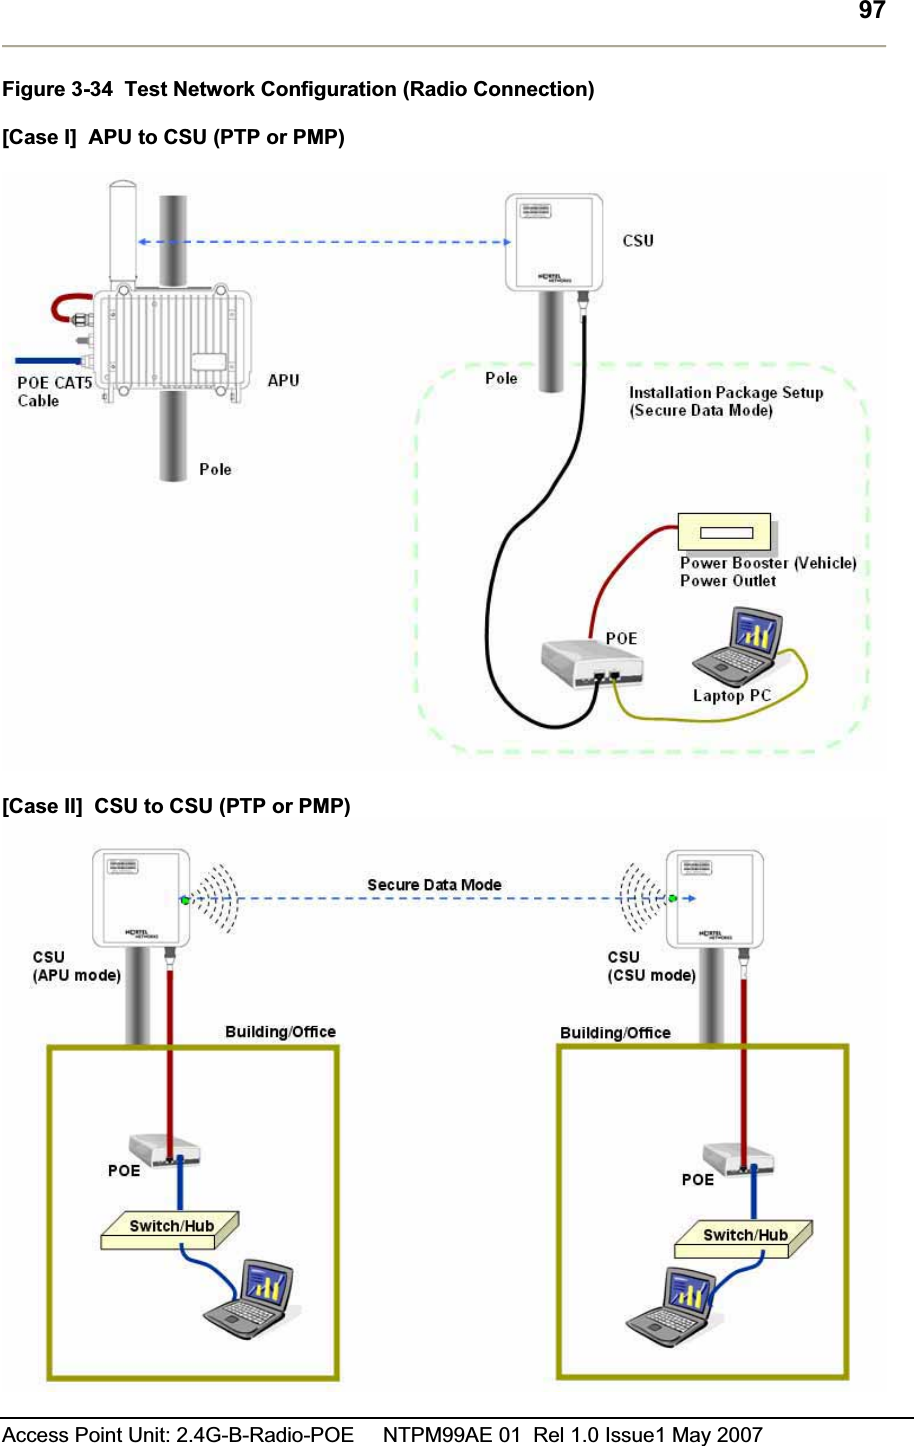 97Access Point Unit: 2.4G-B-Radio-POE     NTPM99AE 01  Rel 1.0 Issue1 May 2007 Figure 3-34  Test Network Configuration (Radio Connection) [Case I]  APU to CSU (PTP or PMP) [Case II]  CSU to CSU (PTP or PMP) 